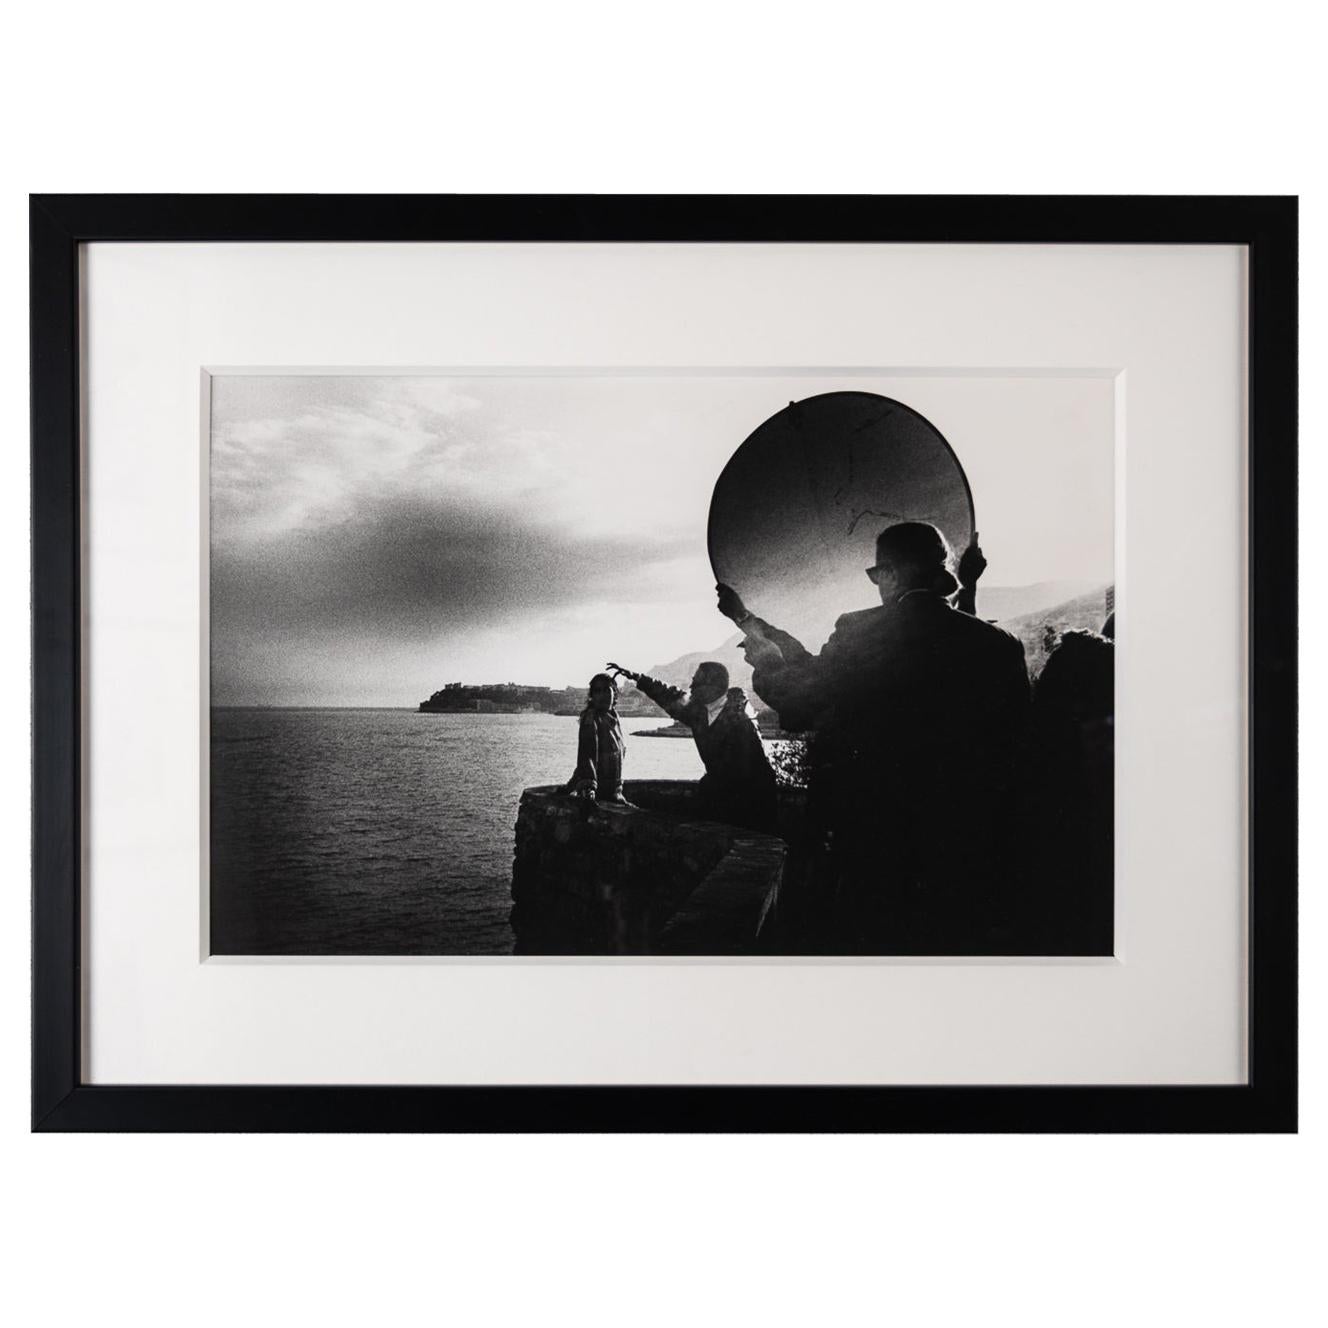 Original Photograph of Karl Lagerfeld on Location For Sale